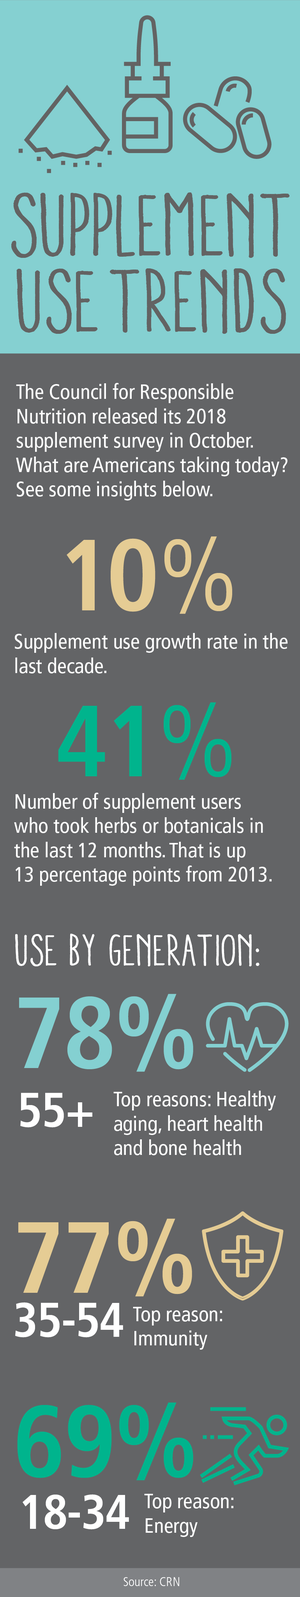 Supplement use increases among adults